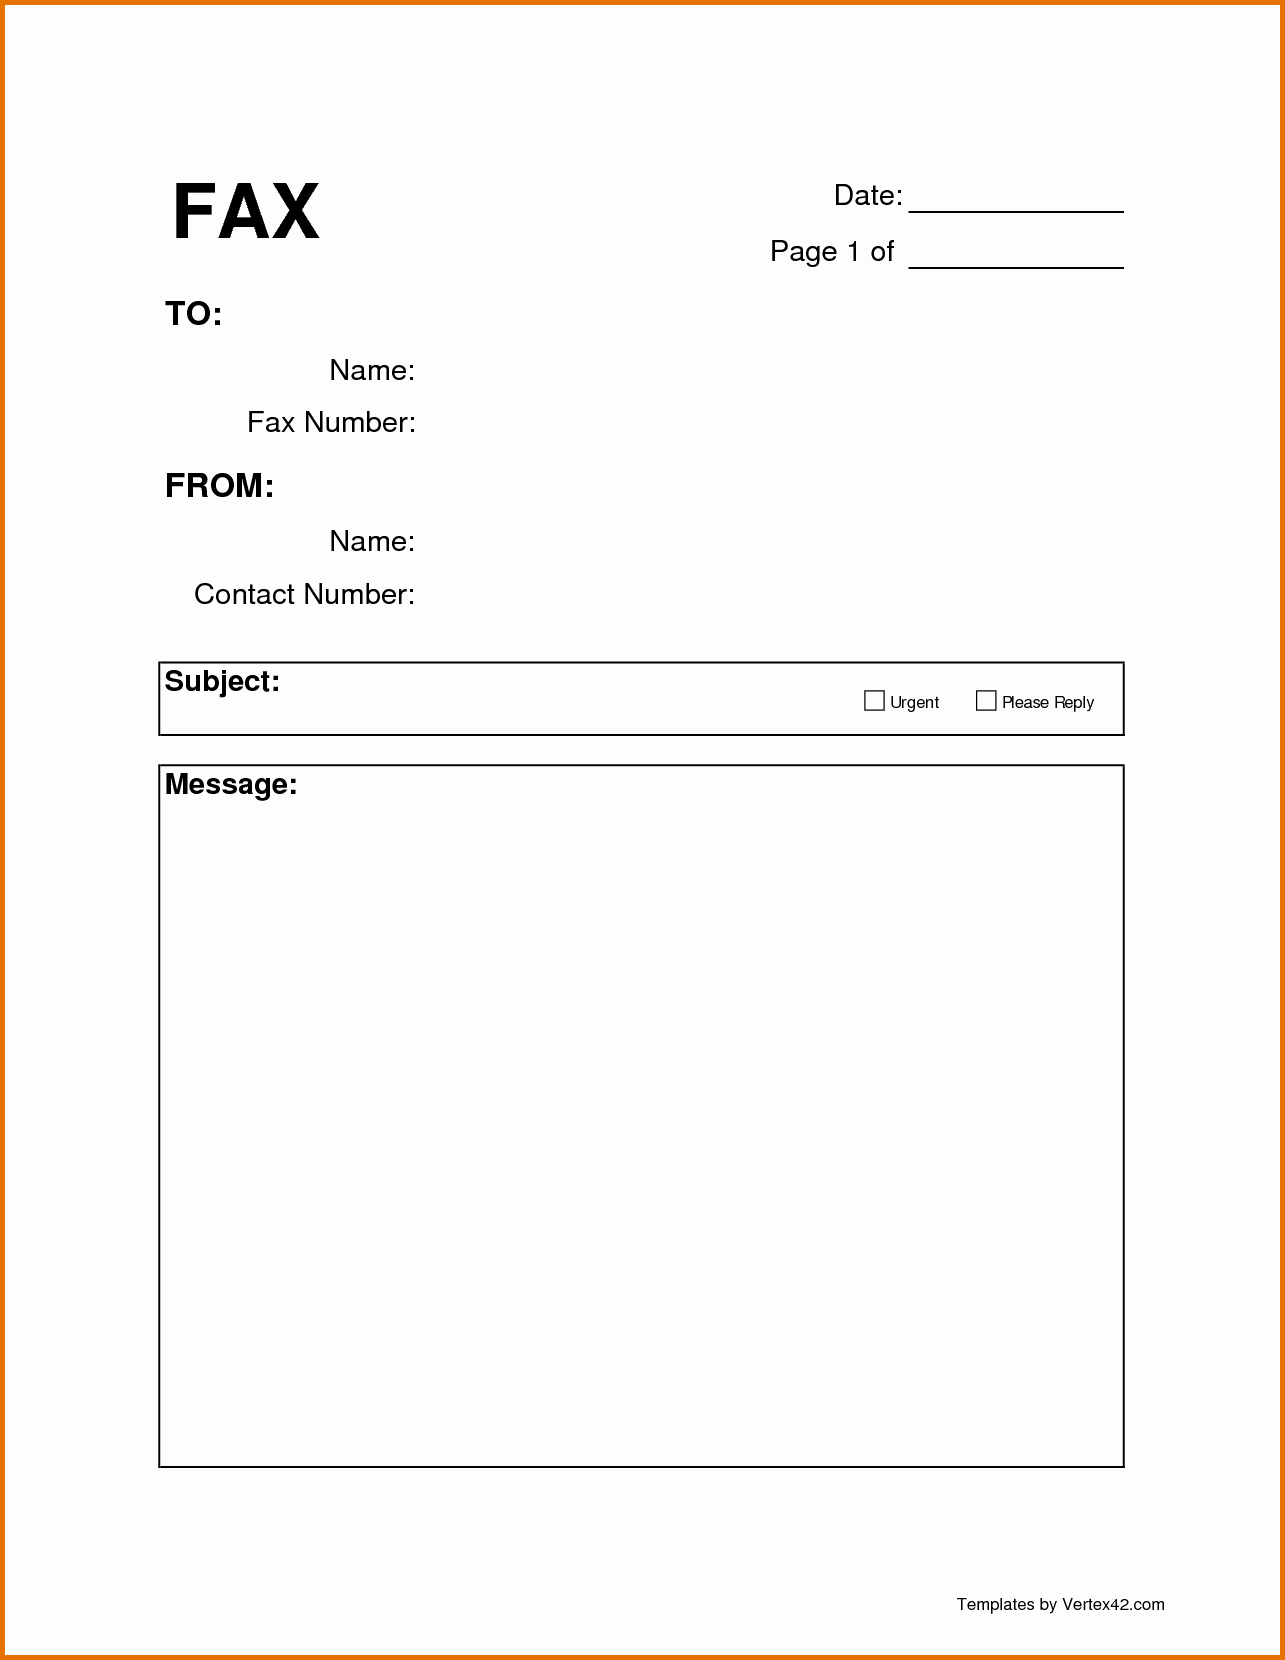 Cover Letter for Fax Document Fresh 4 Printable Fax Cover Sheetsreference Letters Words